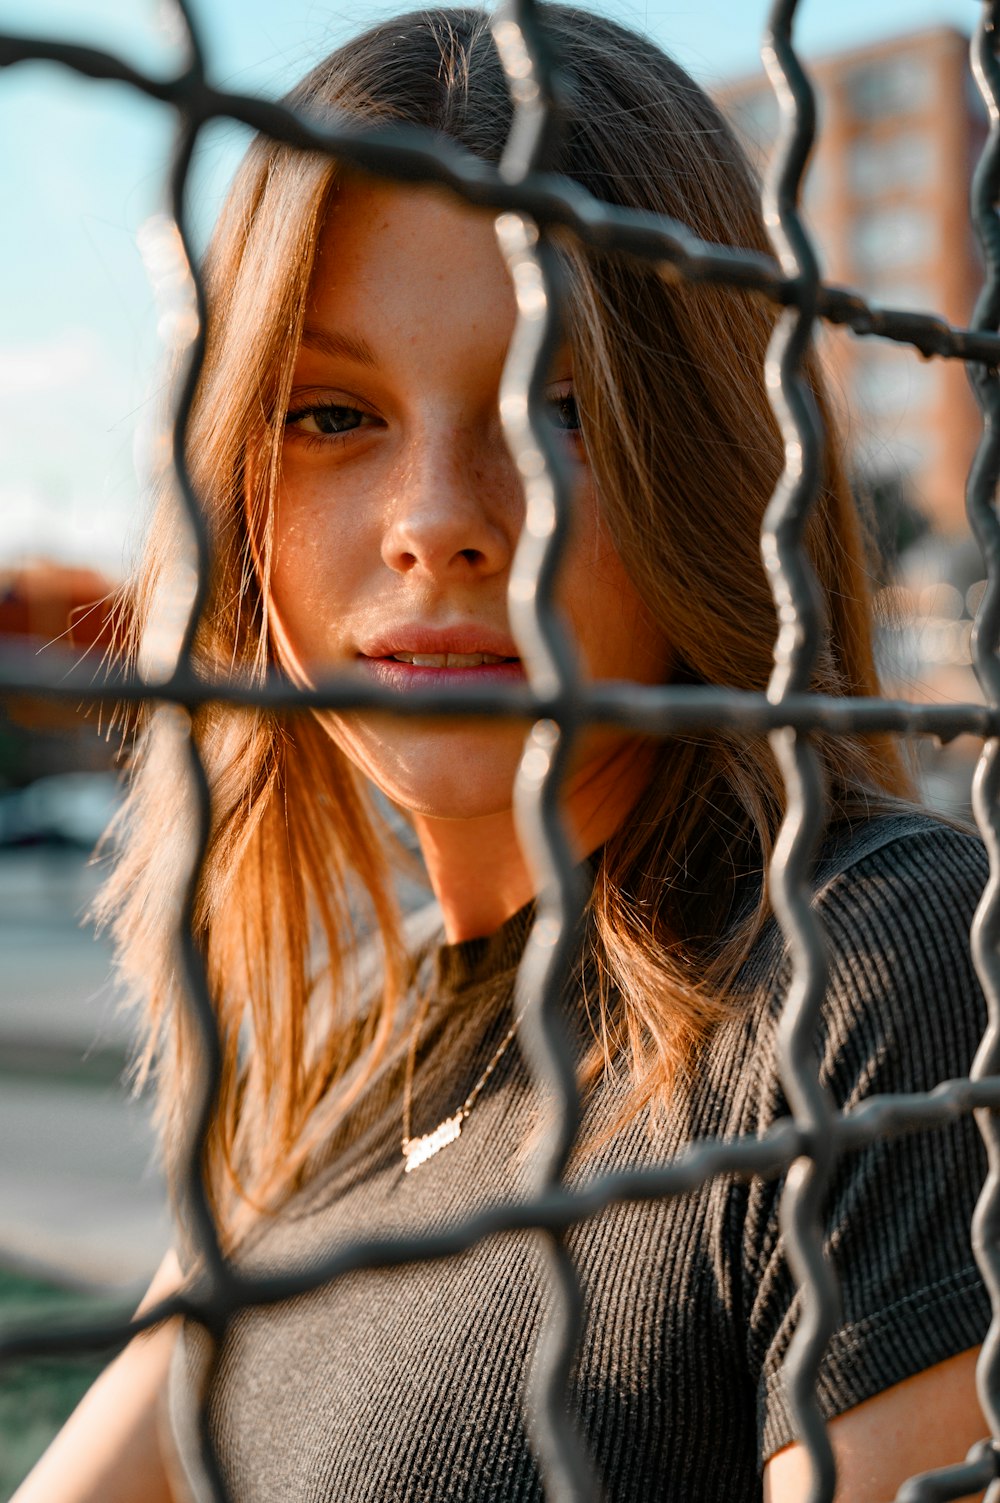 woman in black and white striped shirt leaning on gray metal fence during daytime